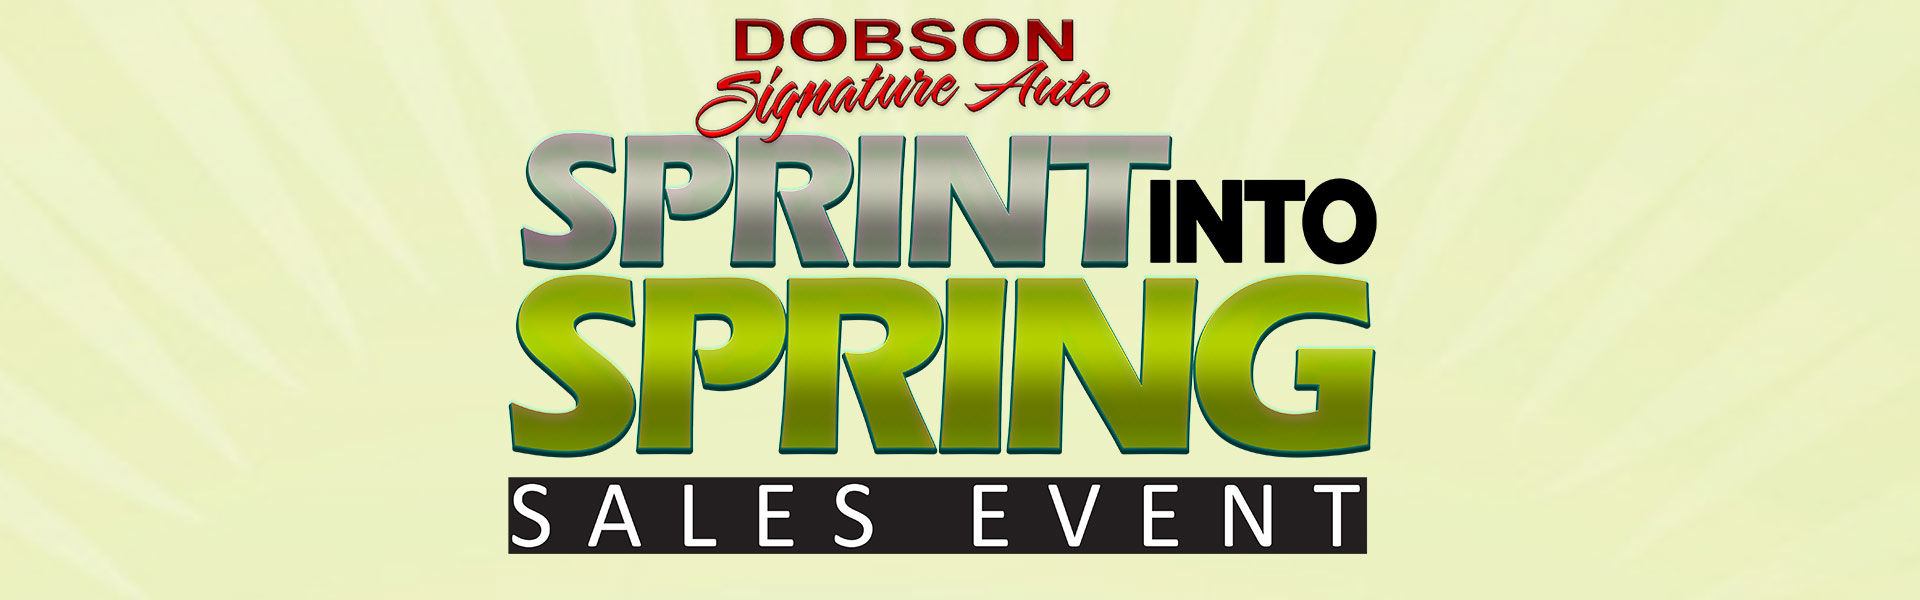 Sprint into Spring Sales Event